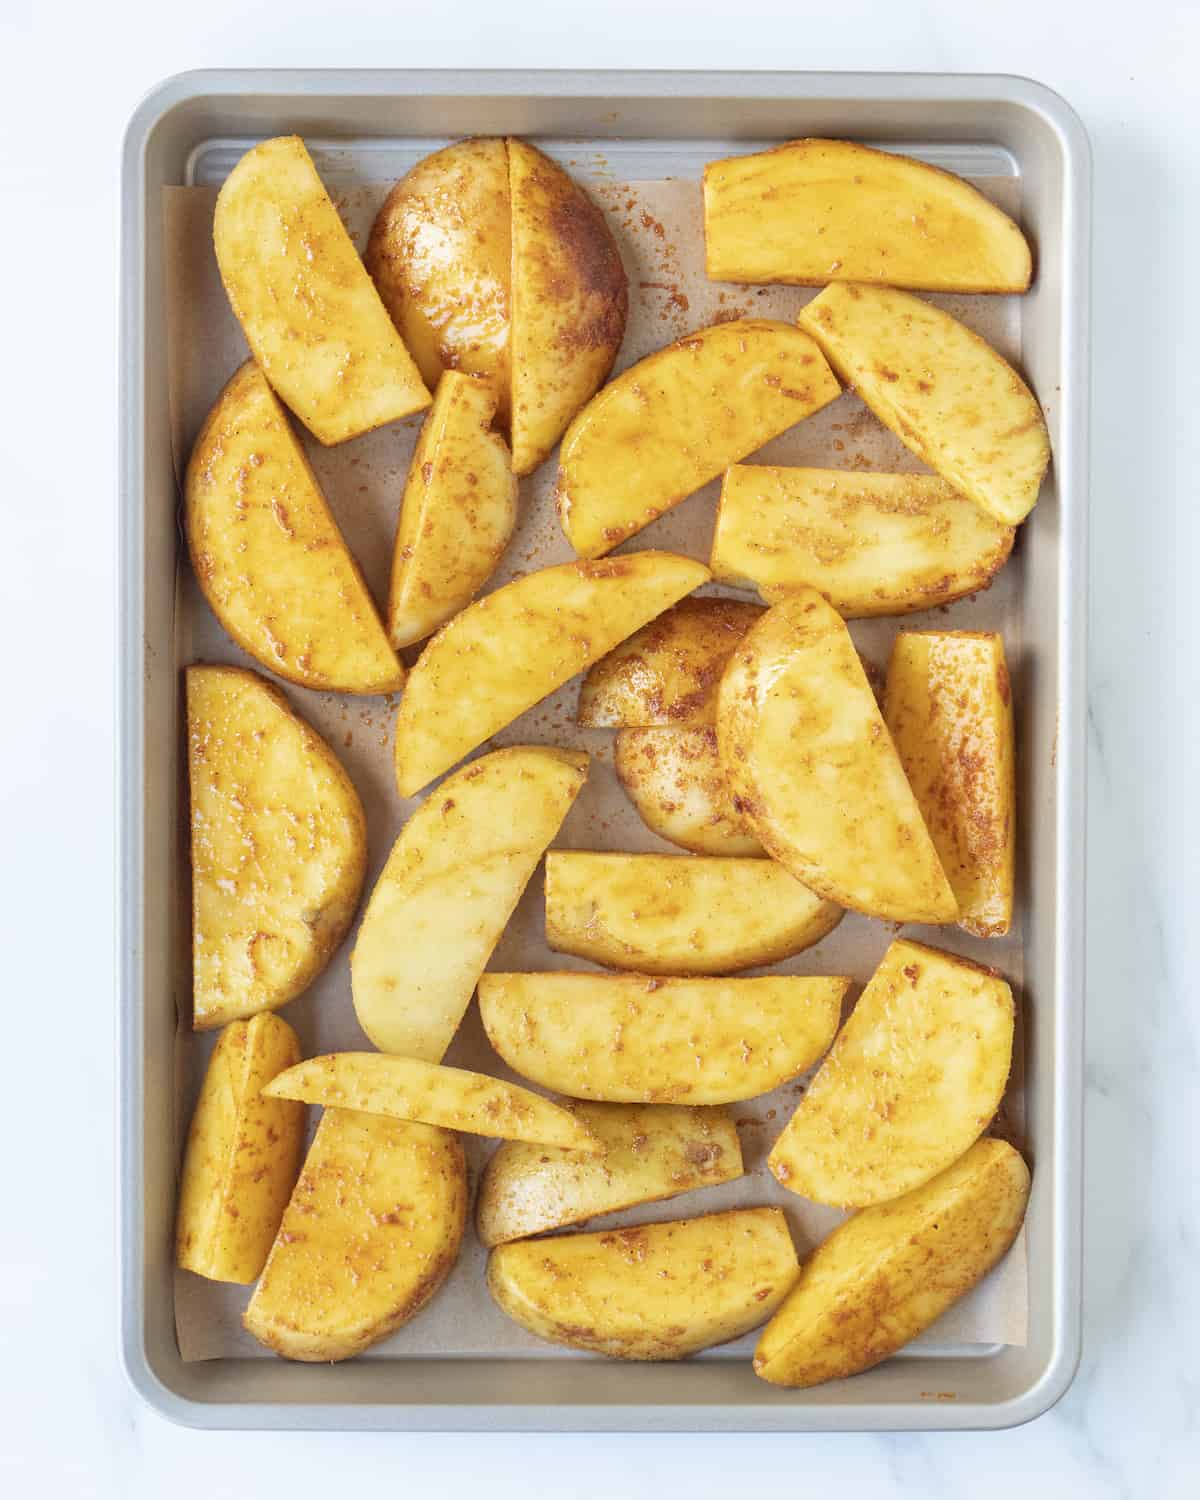 Potato wedges on a metal sheet pan lined with parchment paper on a white countertop.